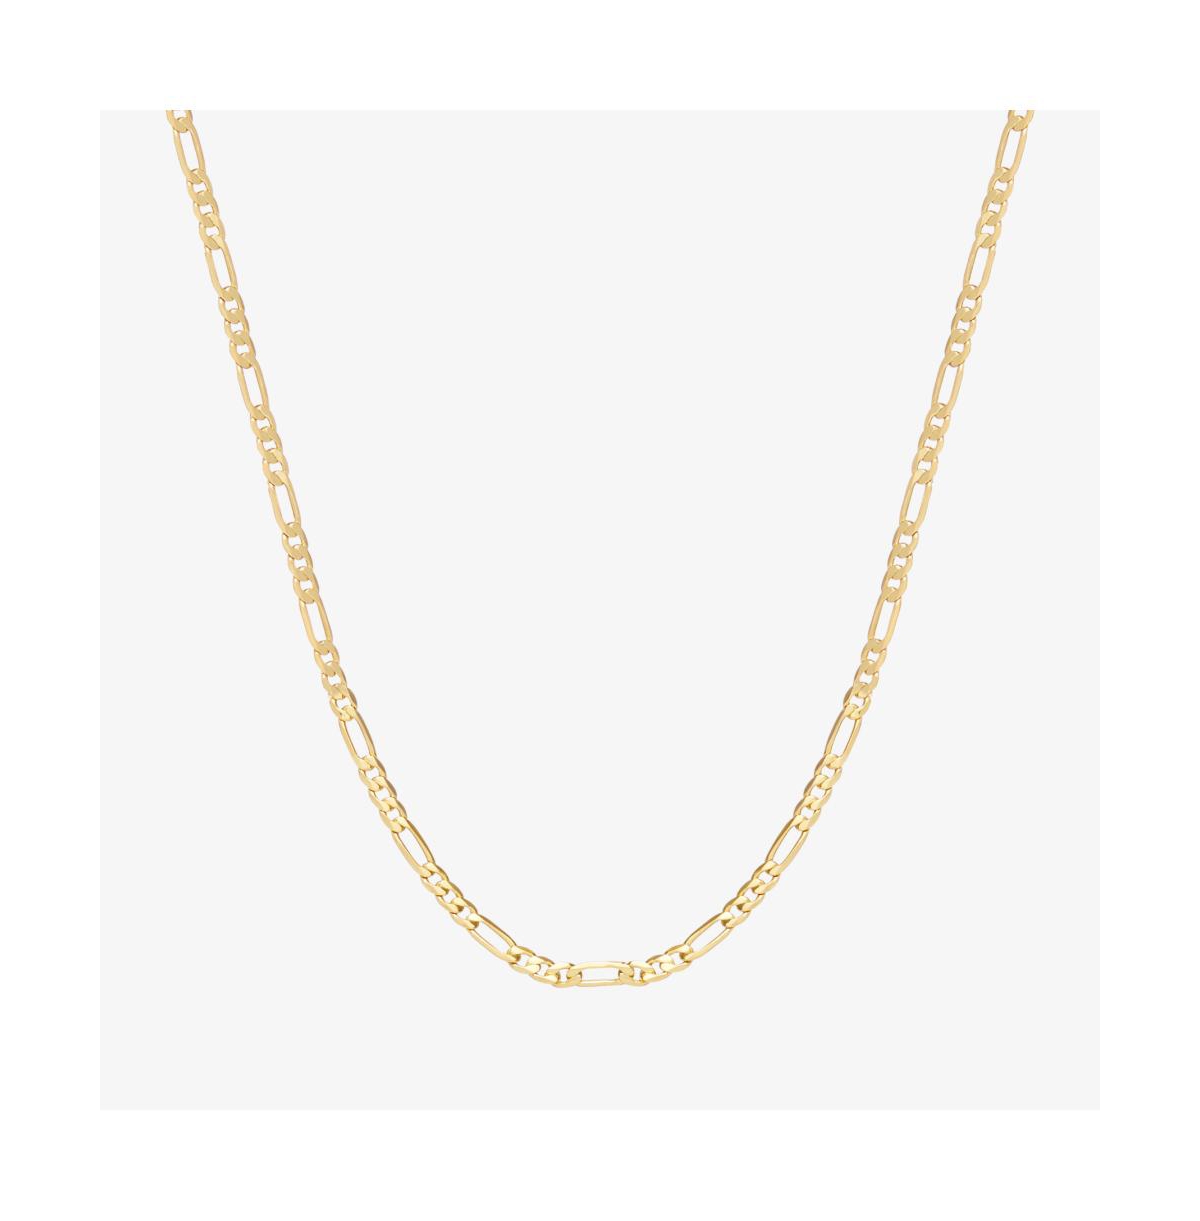 Coin Necklace Set - Willow, Ana Luisa